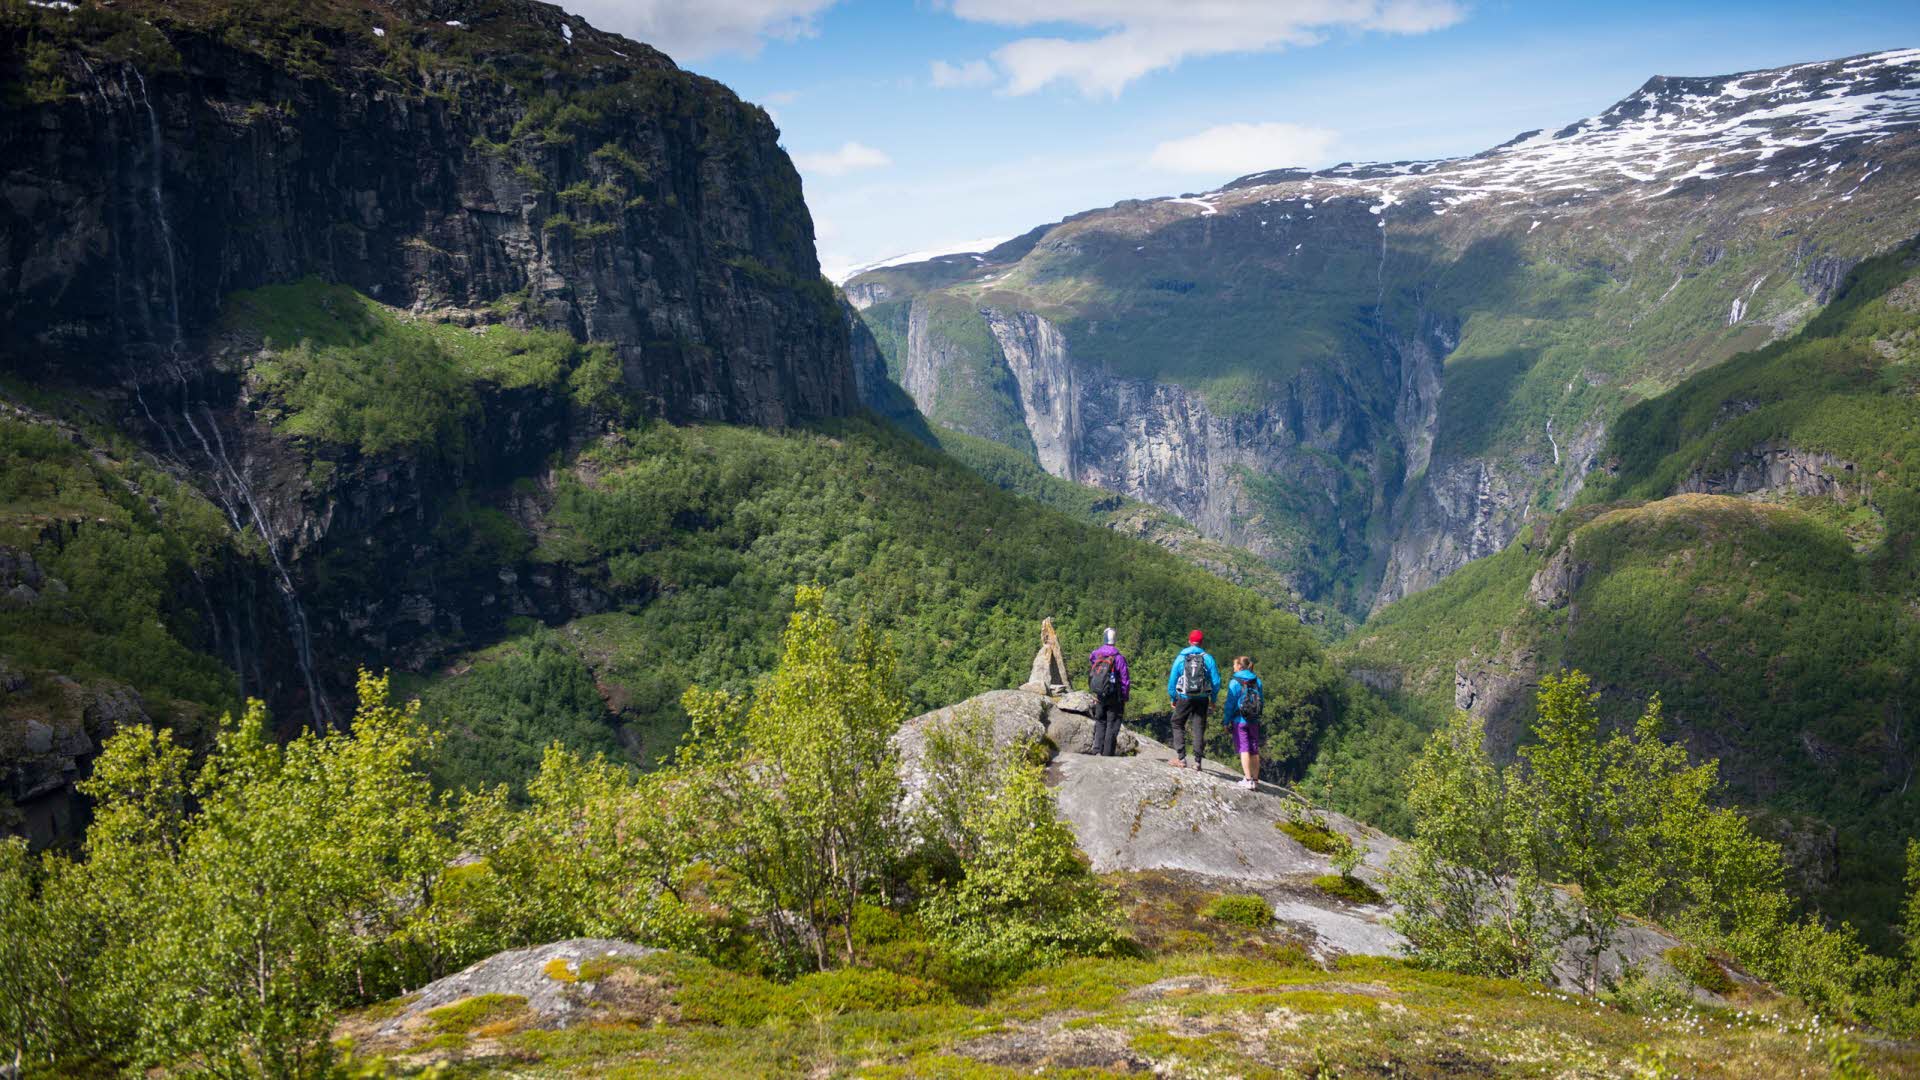 Three people standing by a cairn overlooking the might Aurlandsdalen